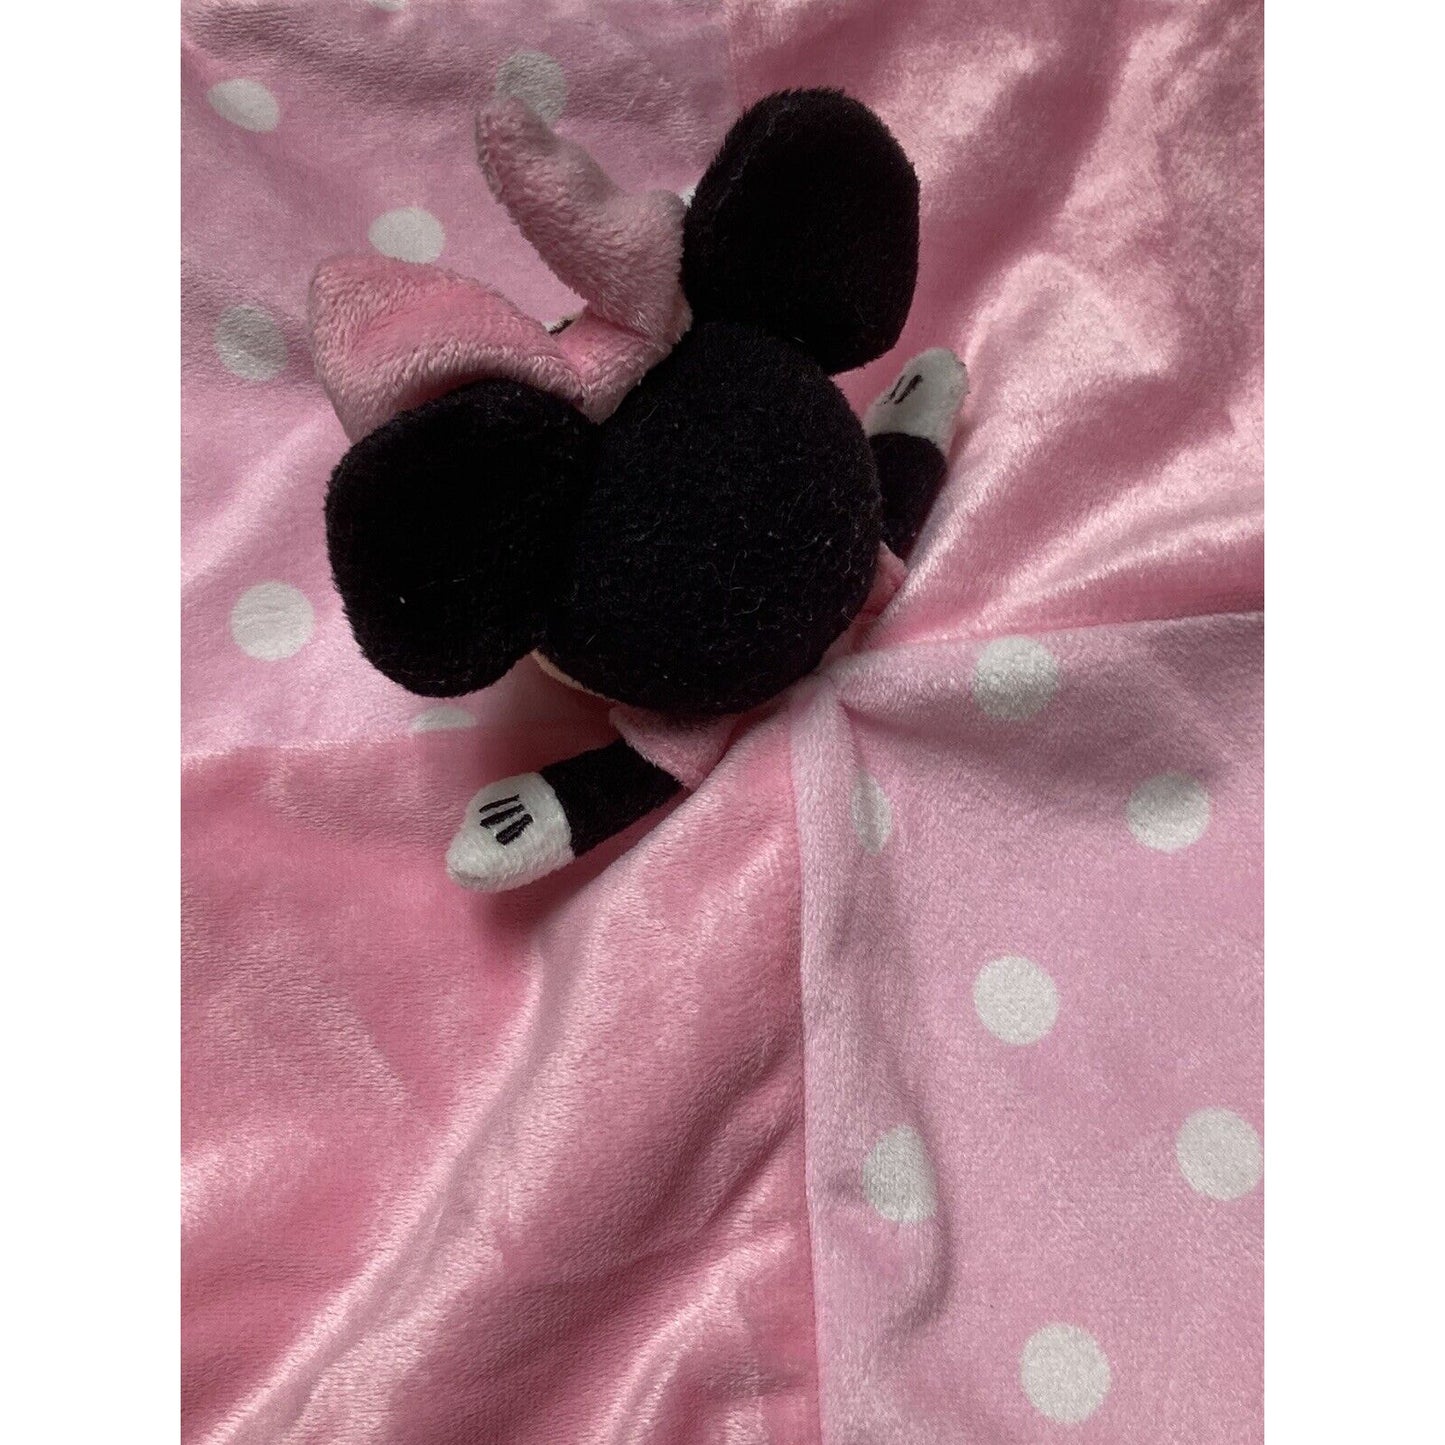 Disney Baby Minnie Mouse Pink Polka Dots Satin Trim Lovey Security Baby Blanket